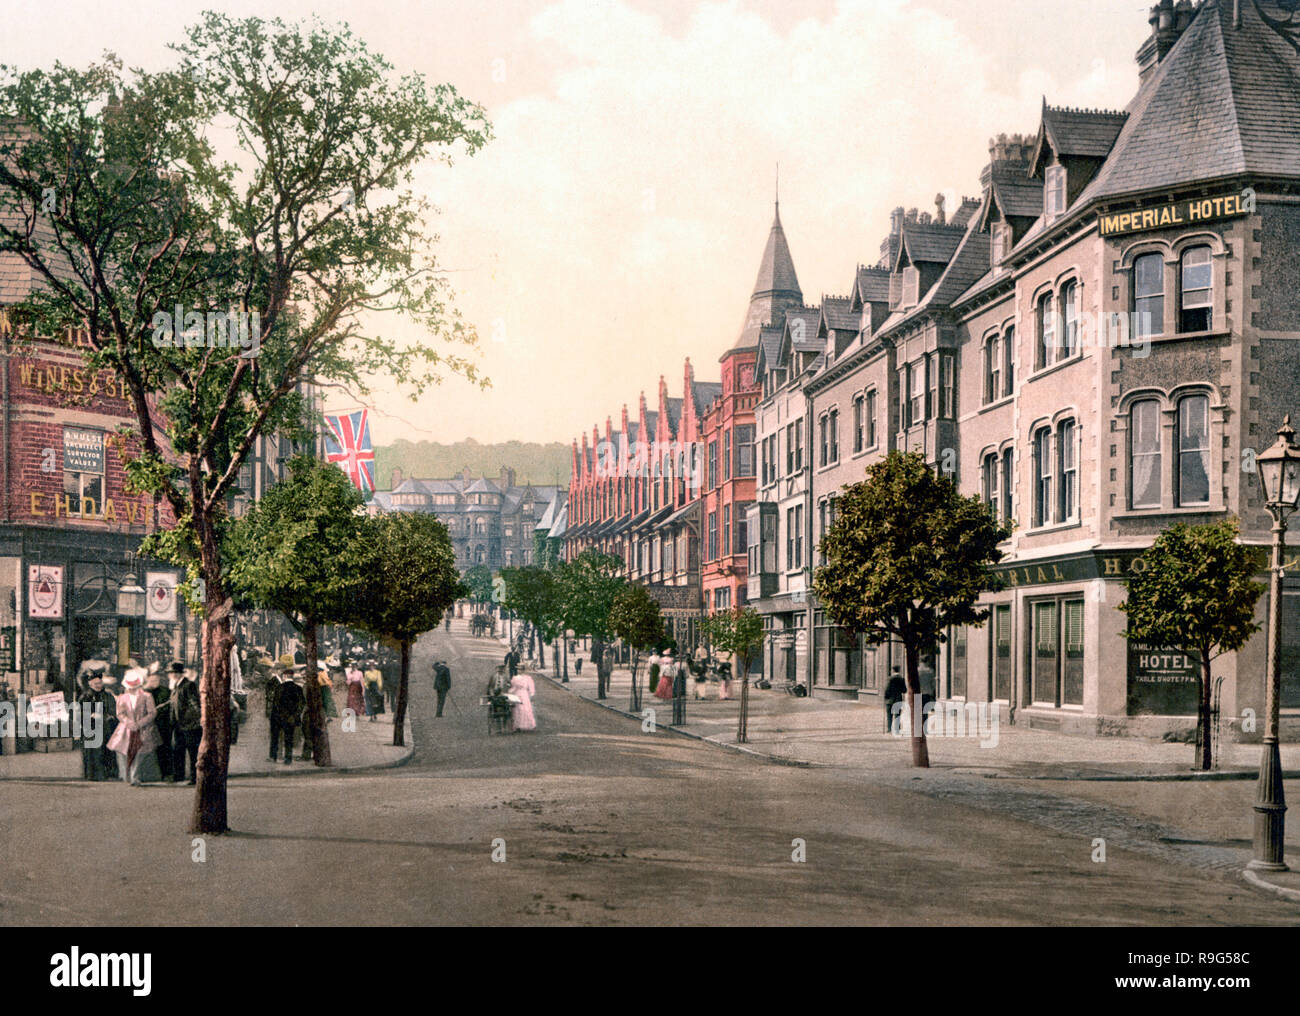 Station Road, Colwyn Bay, Pays de Galles, vers 1900 Banque D'Images